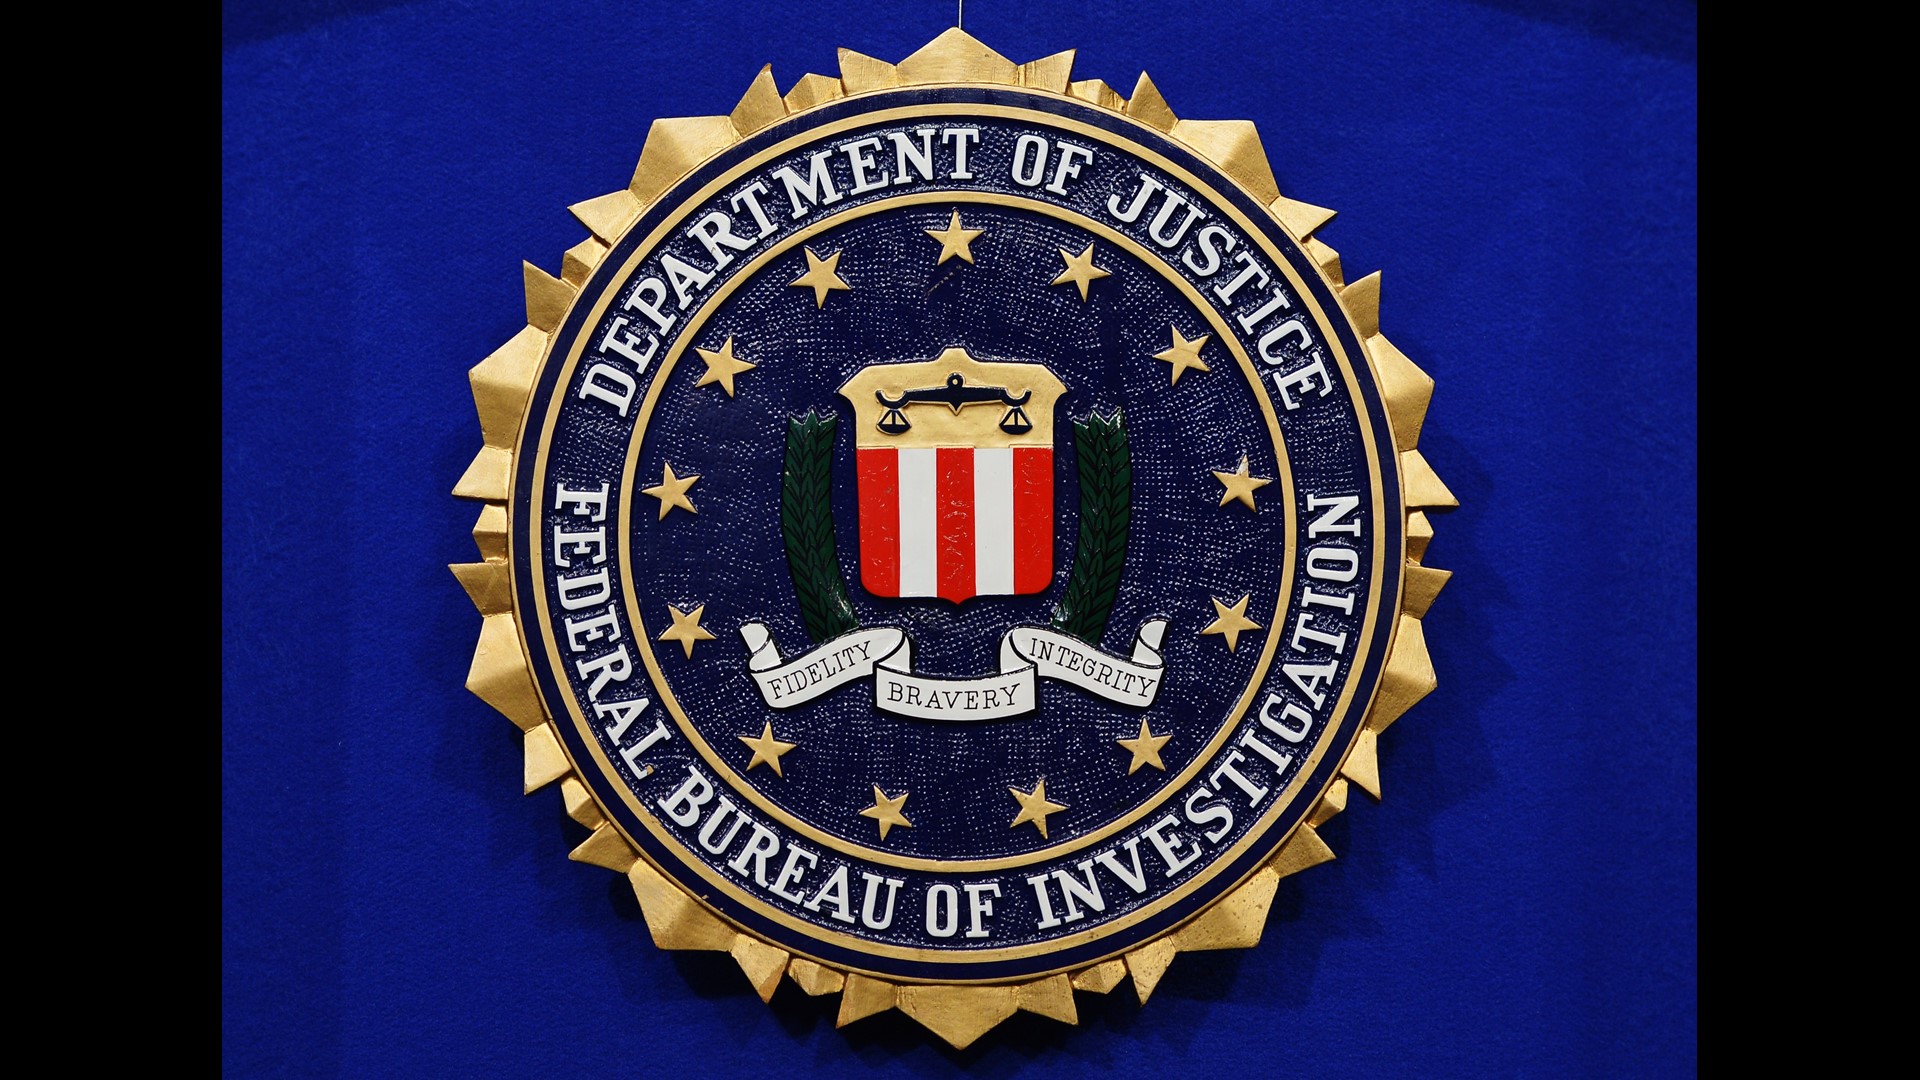 FBI Special Agent Recruitment Event
The FBI is inviting people from all over the metro area to apply to become a special agent at their Diversity Agent Recruitment event later this month. To apply, call 504-816-3000.